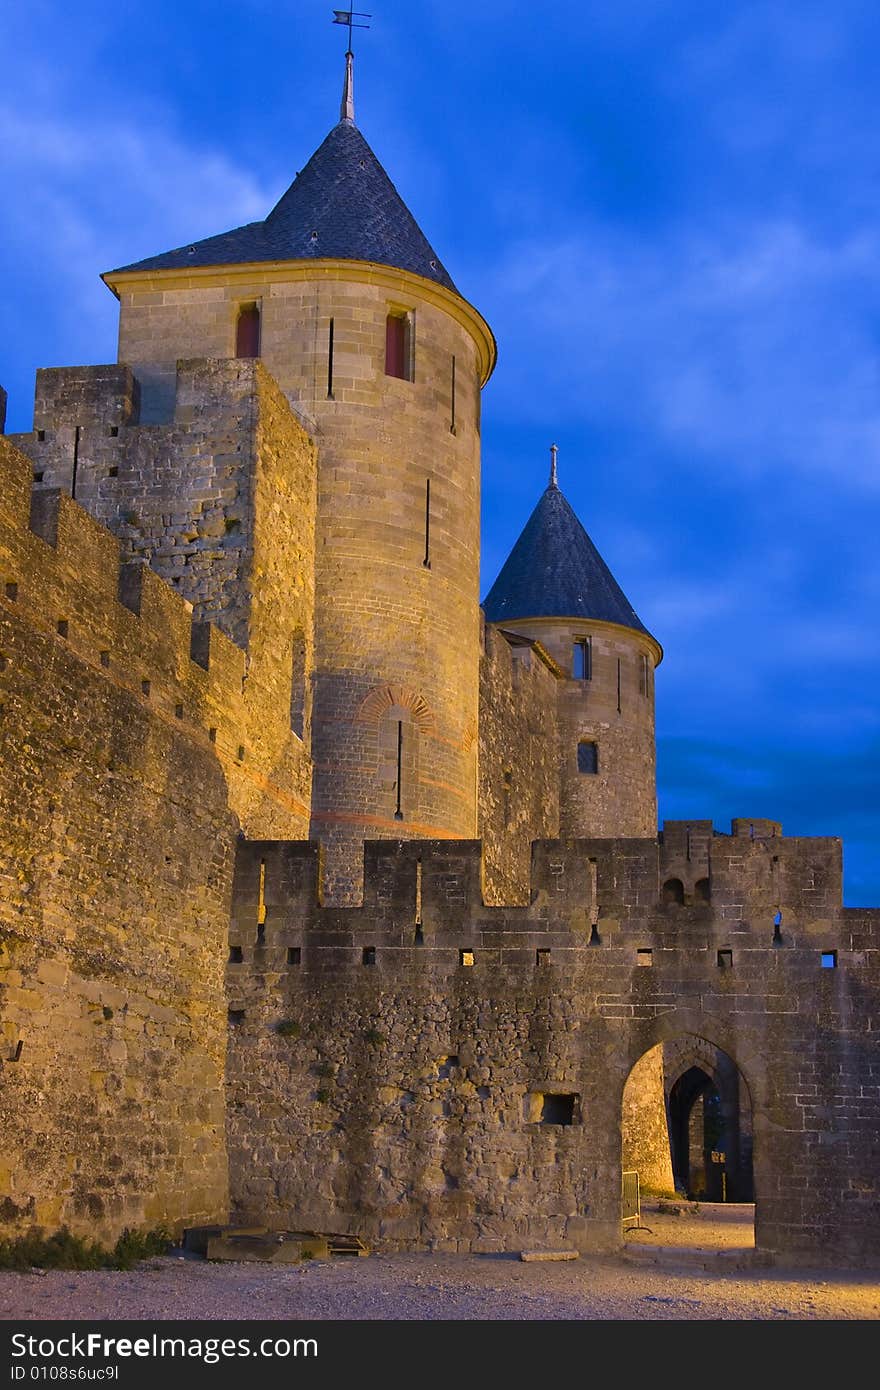 The towers of Carcassonne's medieval walls are illuminated as dusk falls. The towers of Carcassonne's medieval walls are illuminated as dusk falls.